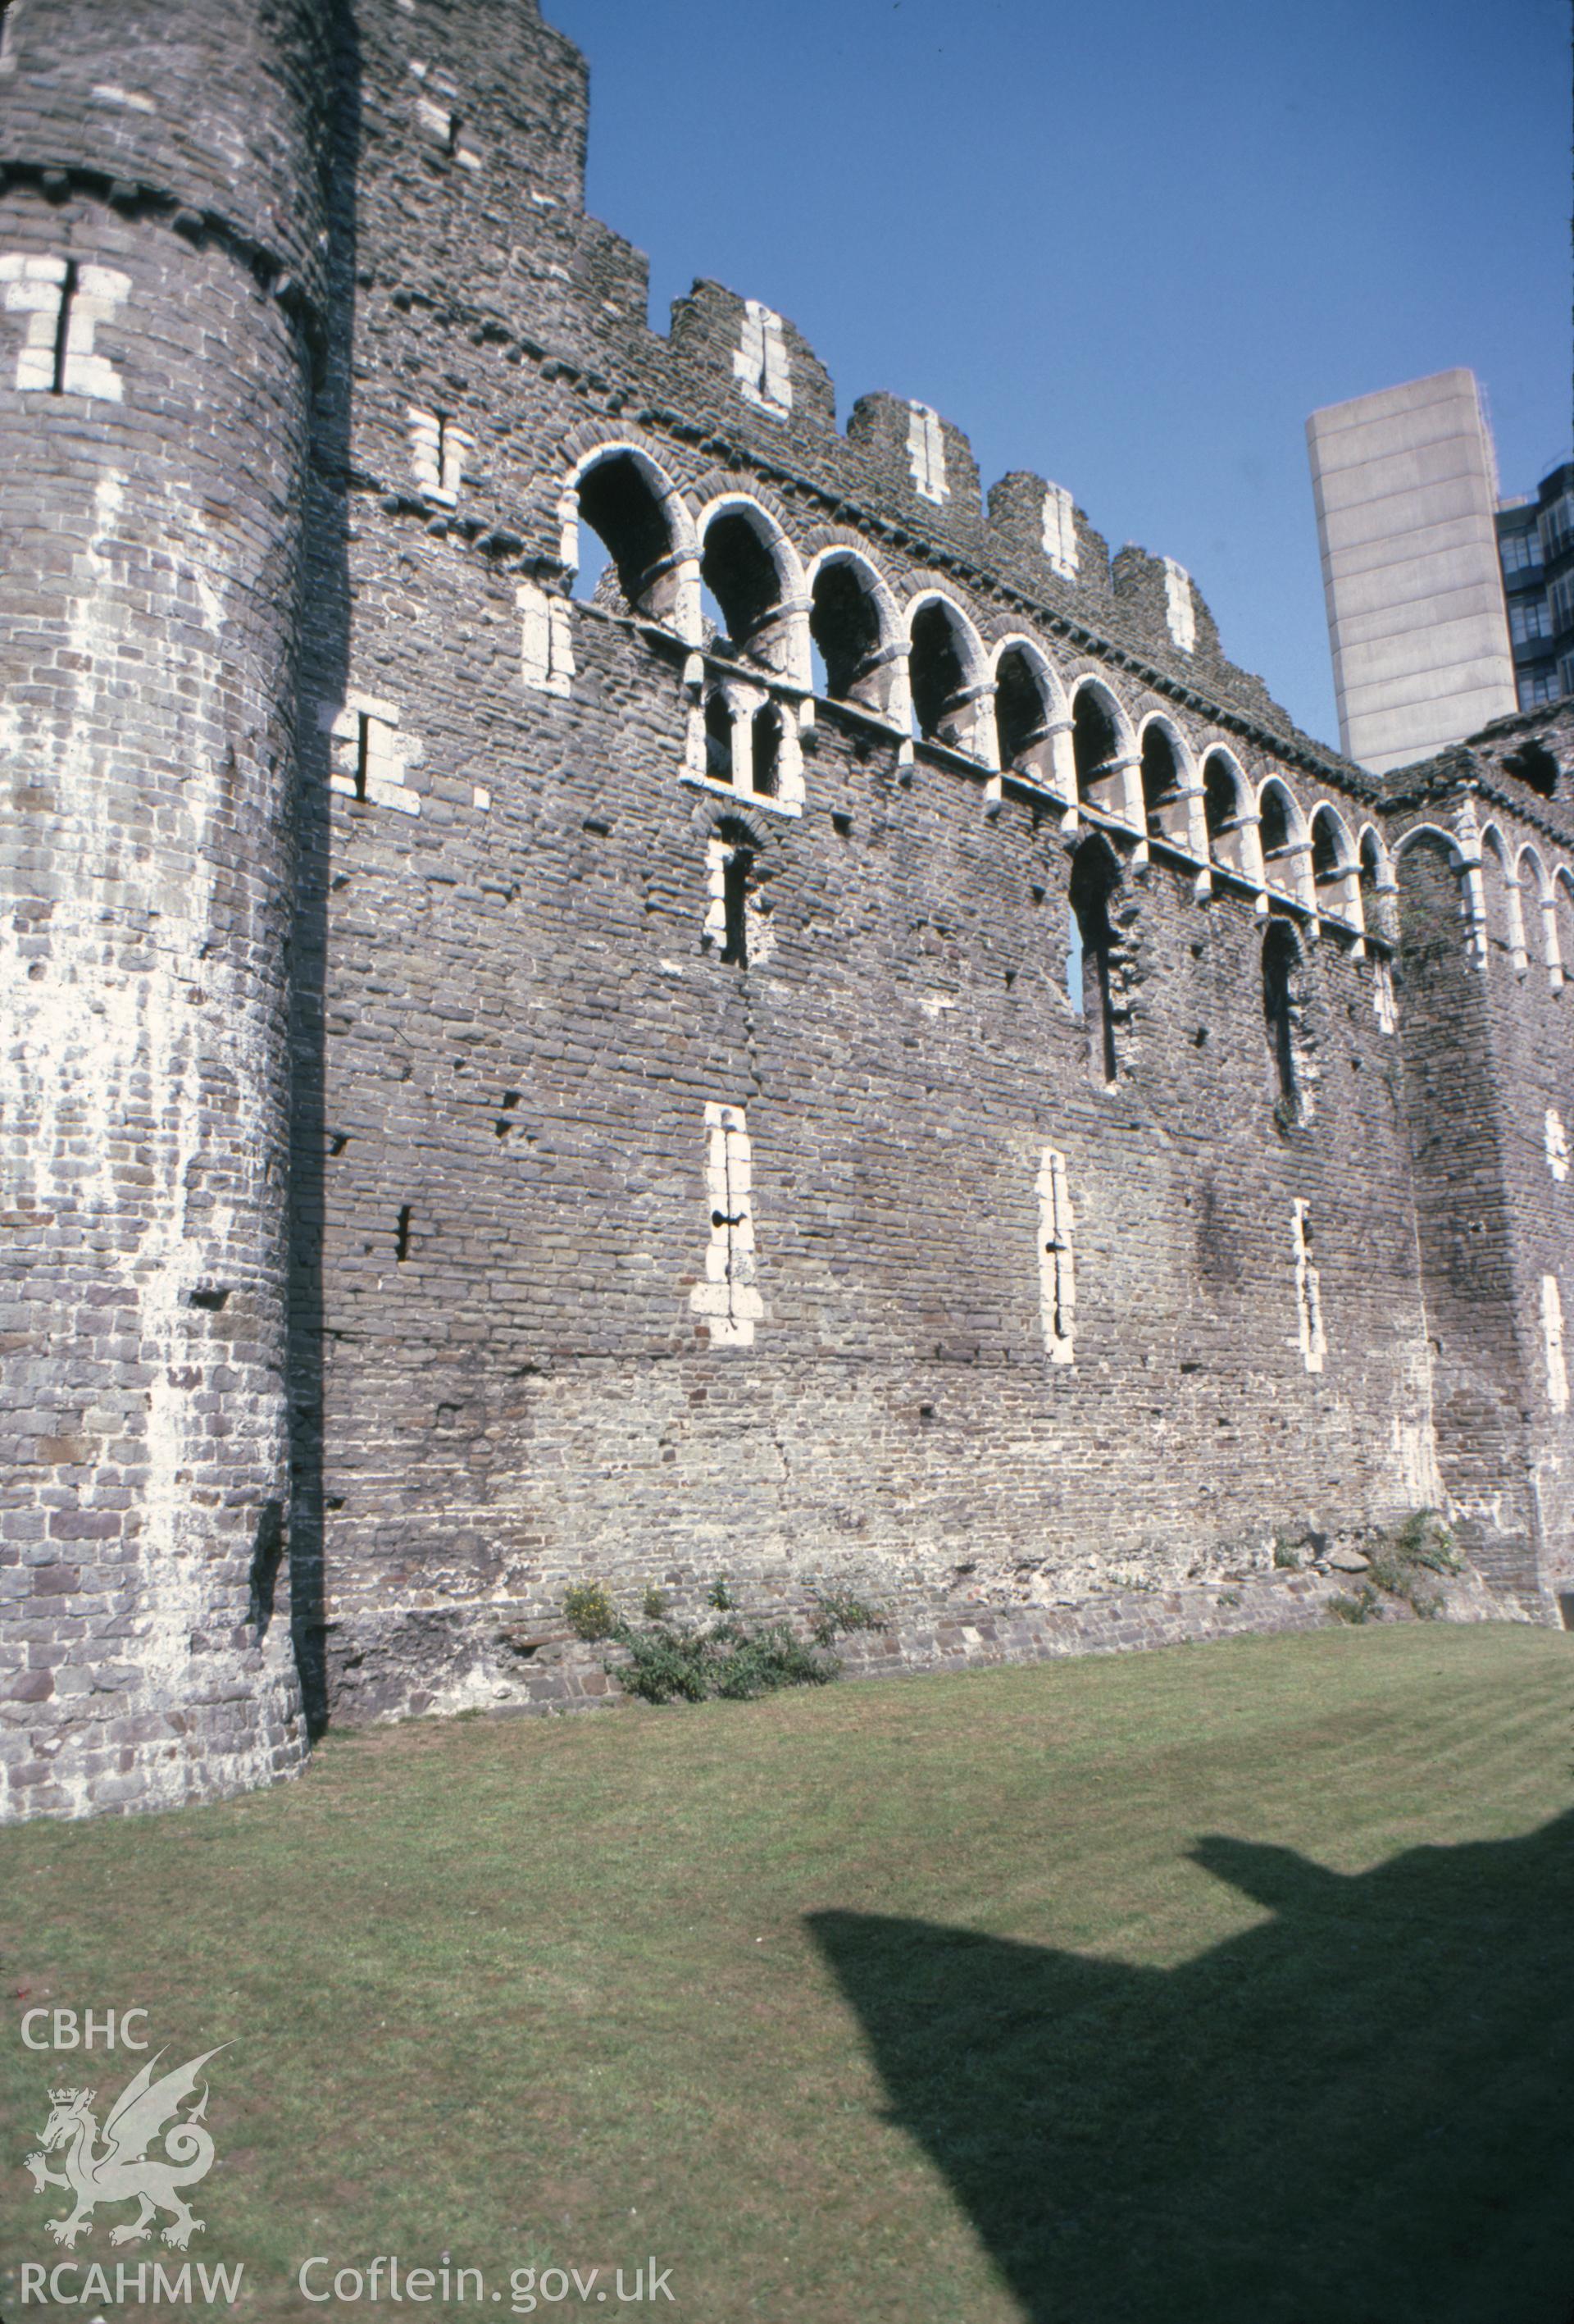 Colour photographic transparency showing view of Swansea Castle; collated by the former Central Office of Information.